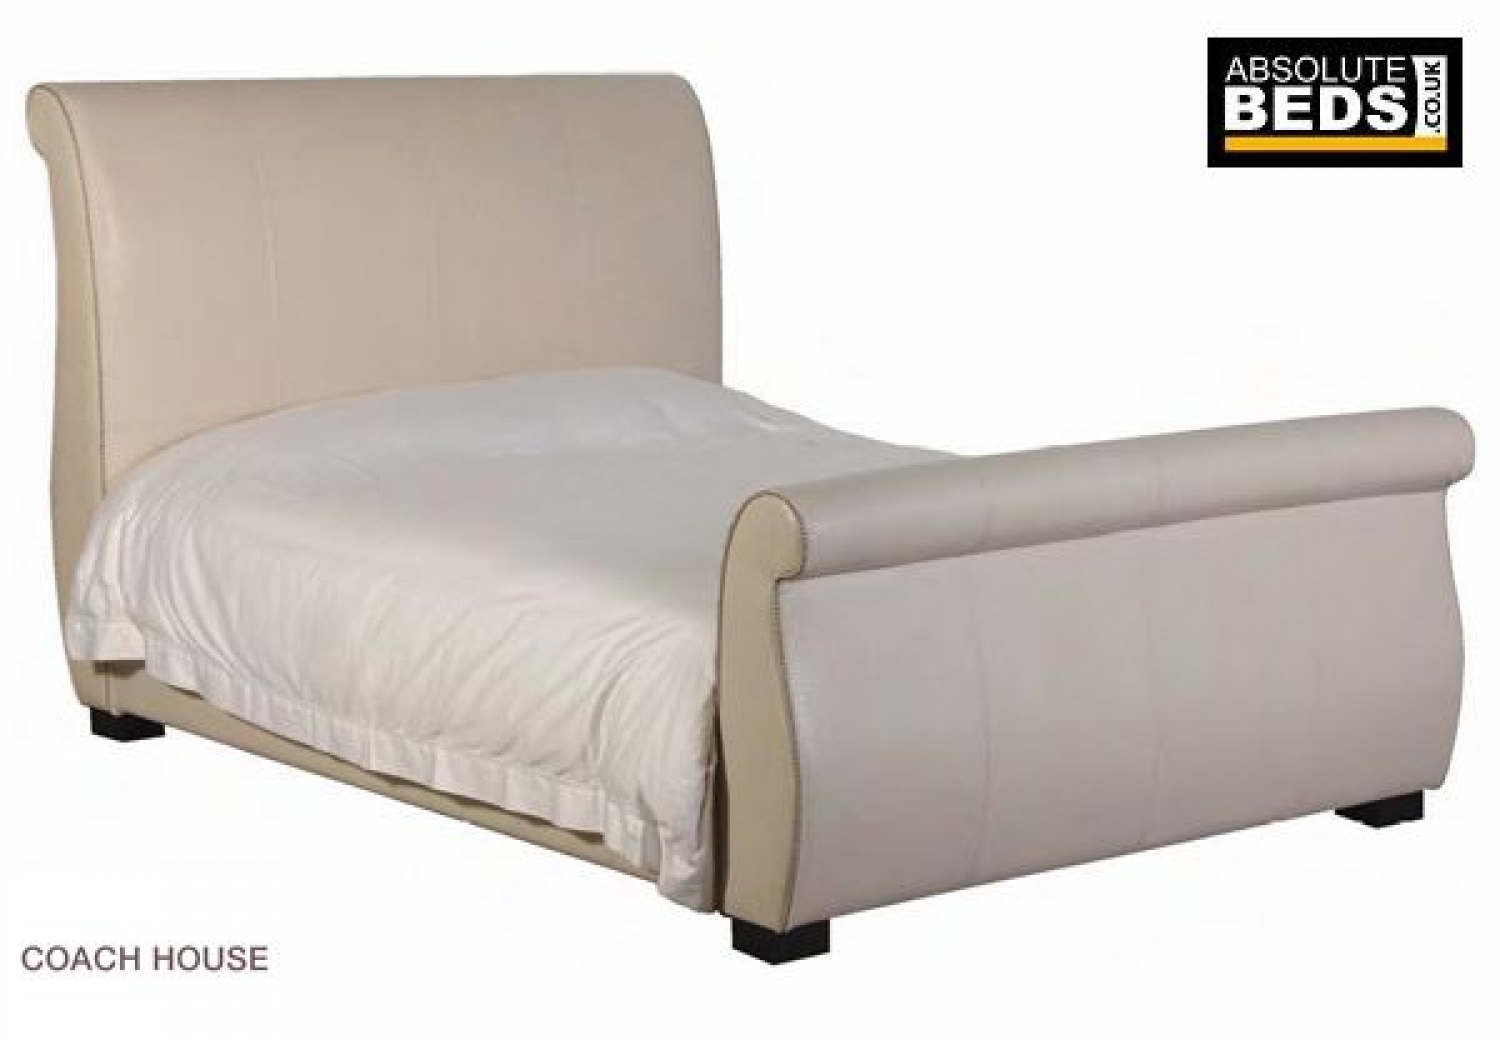 Faux Croc Leather Sleigh Bed Frame, Cream Faux Leather Bed